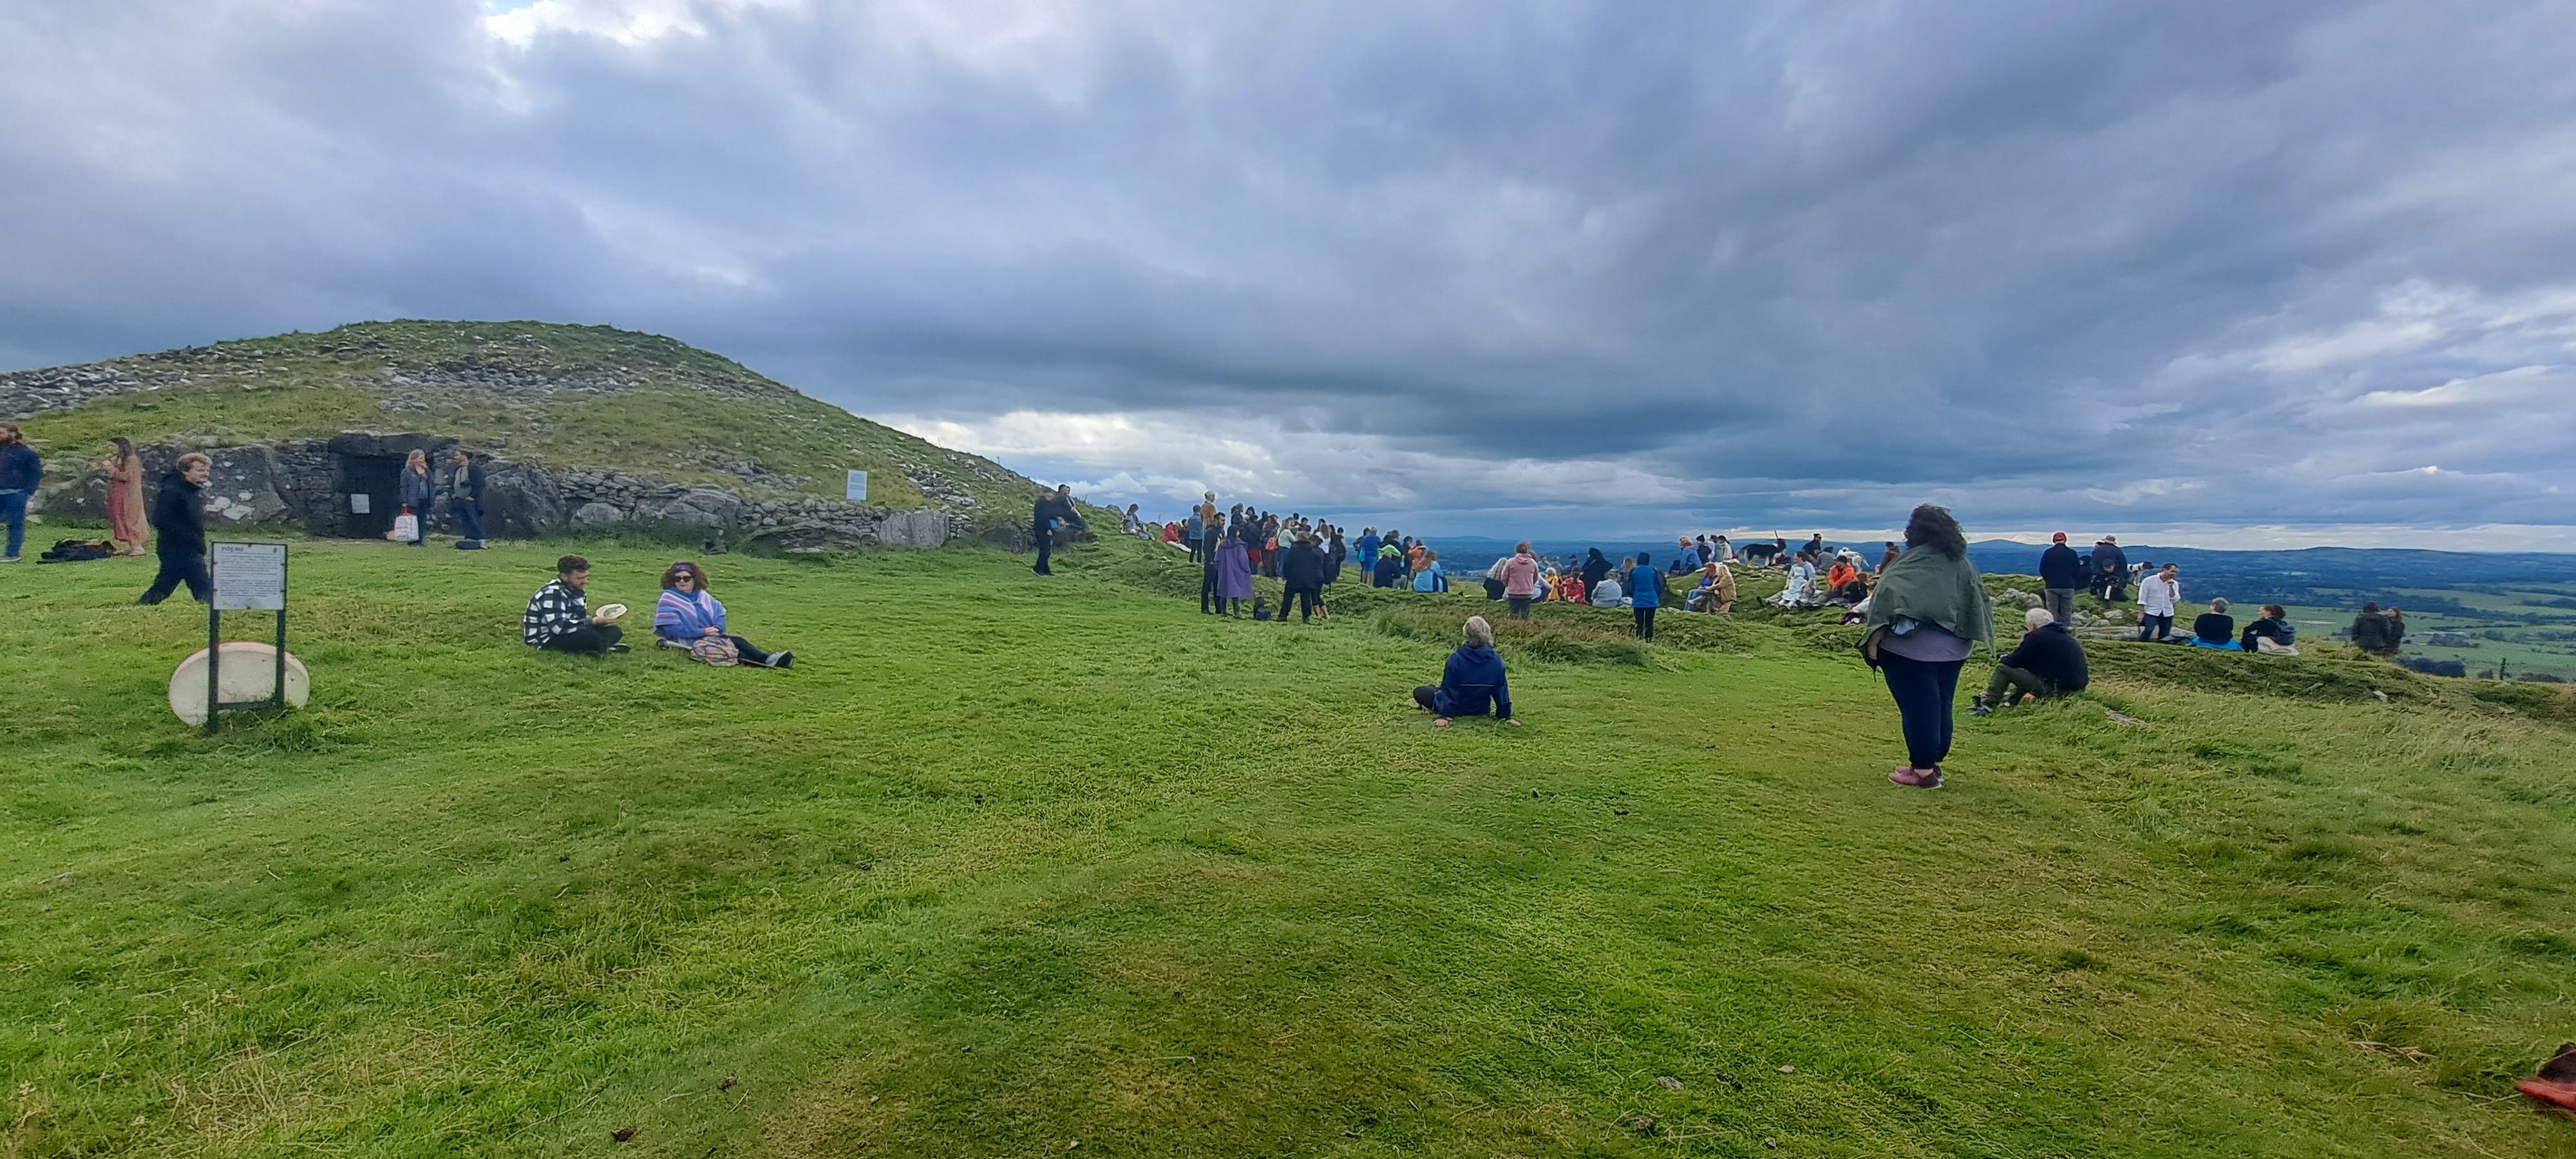 People beginning to gather at Loughcrew; the mound of Cairn T is to the left of the image beneath a dark, cloudy sky against which the green of the grass seems very bright. In the foreground and to the right of the image, groups of people begin to gather and wait.